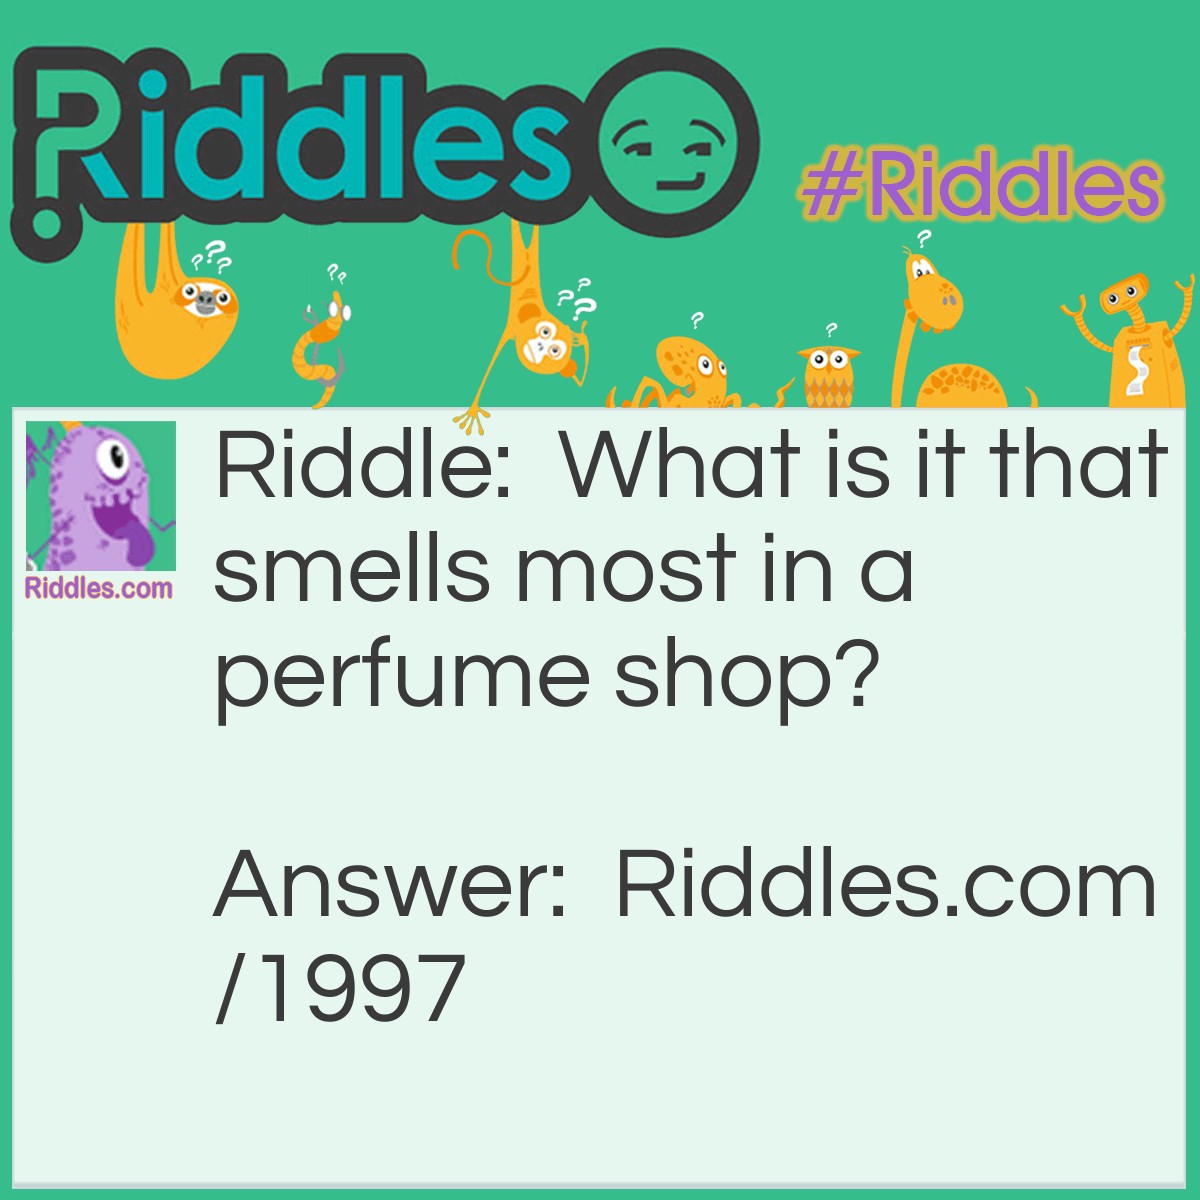 Riddle: What is it that smells most in a perfume shop? Answer: The nose.